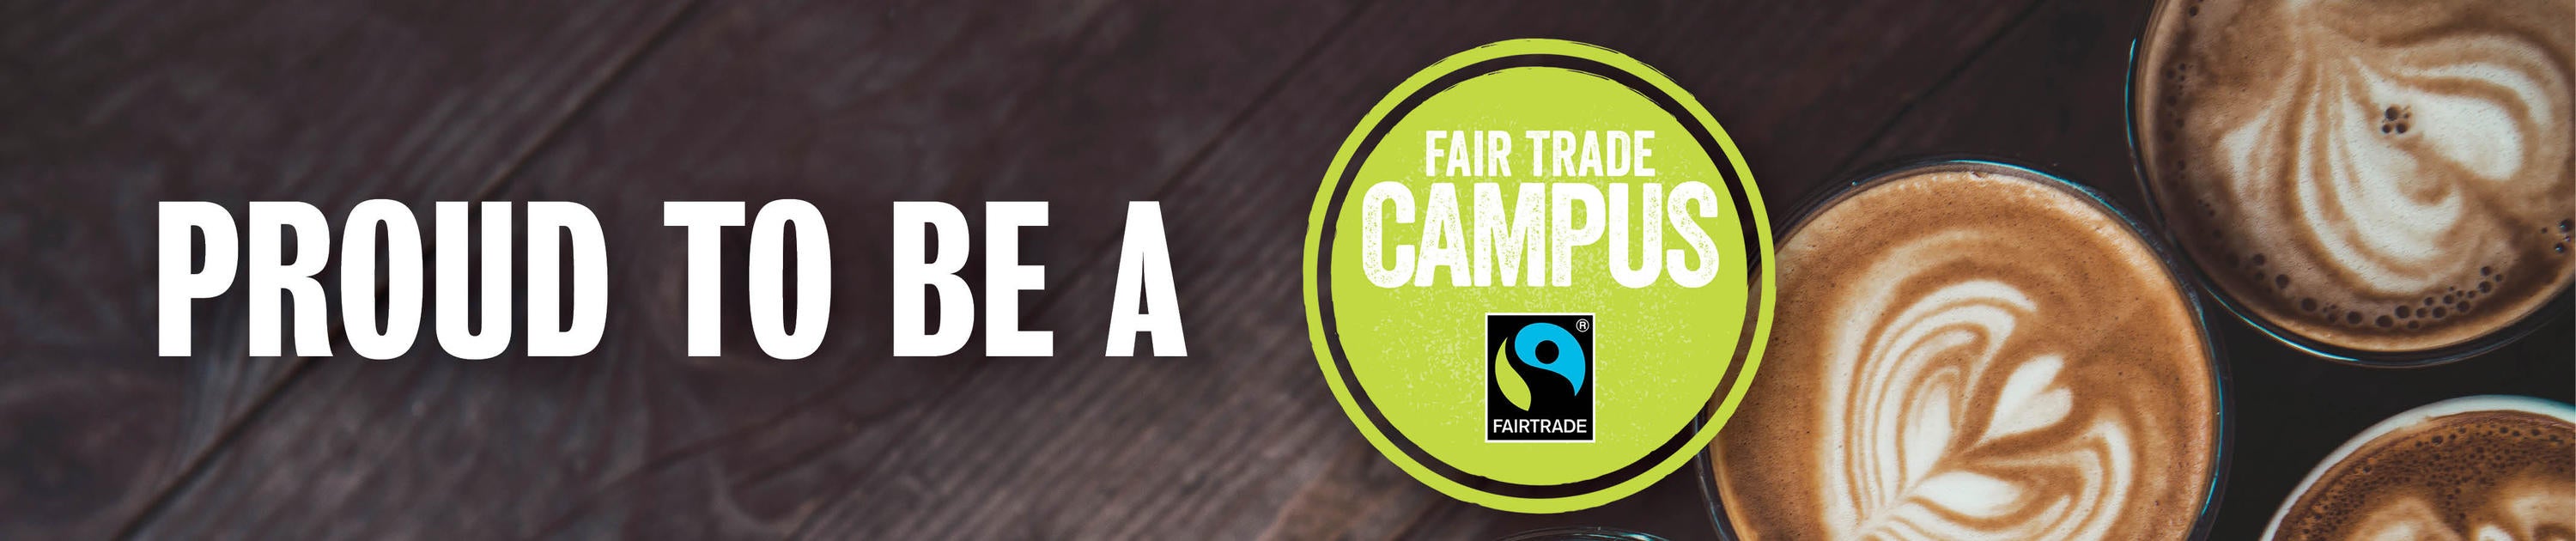 Fairtrade: How does it protect the environment?, UW Food Services